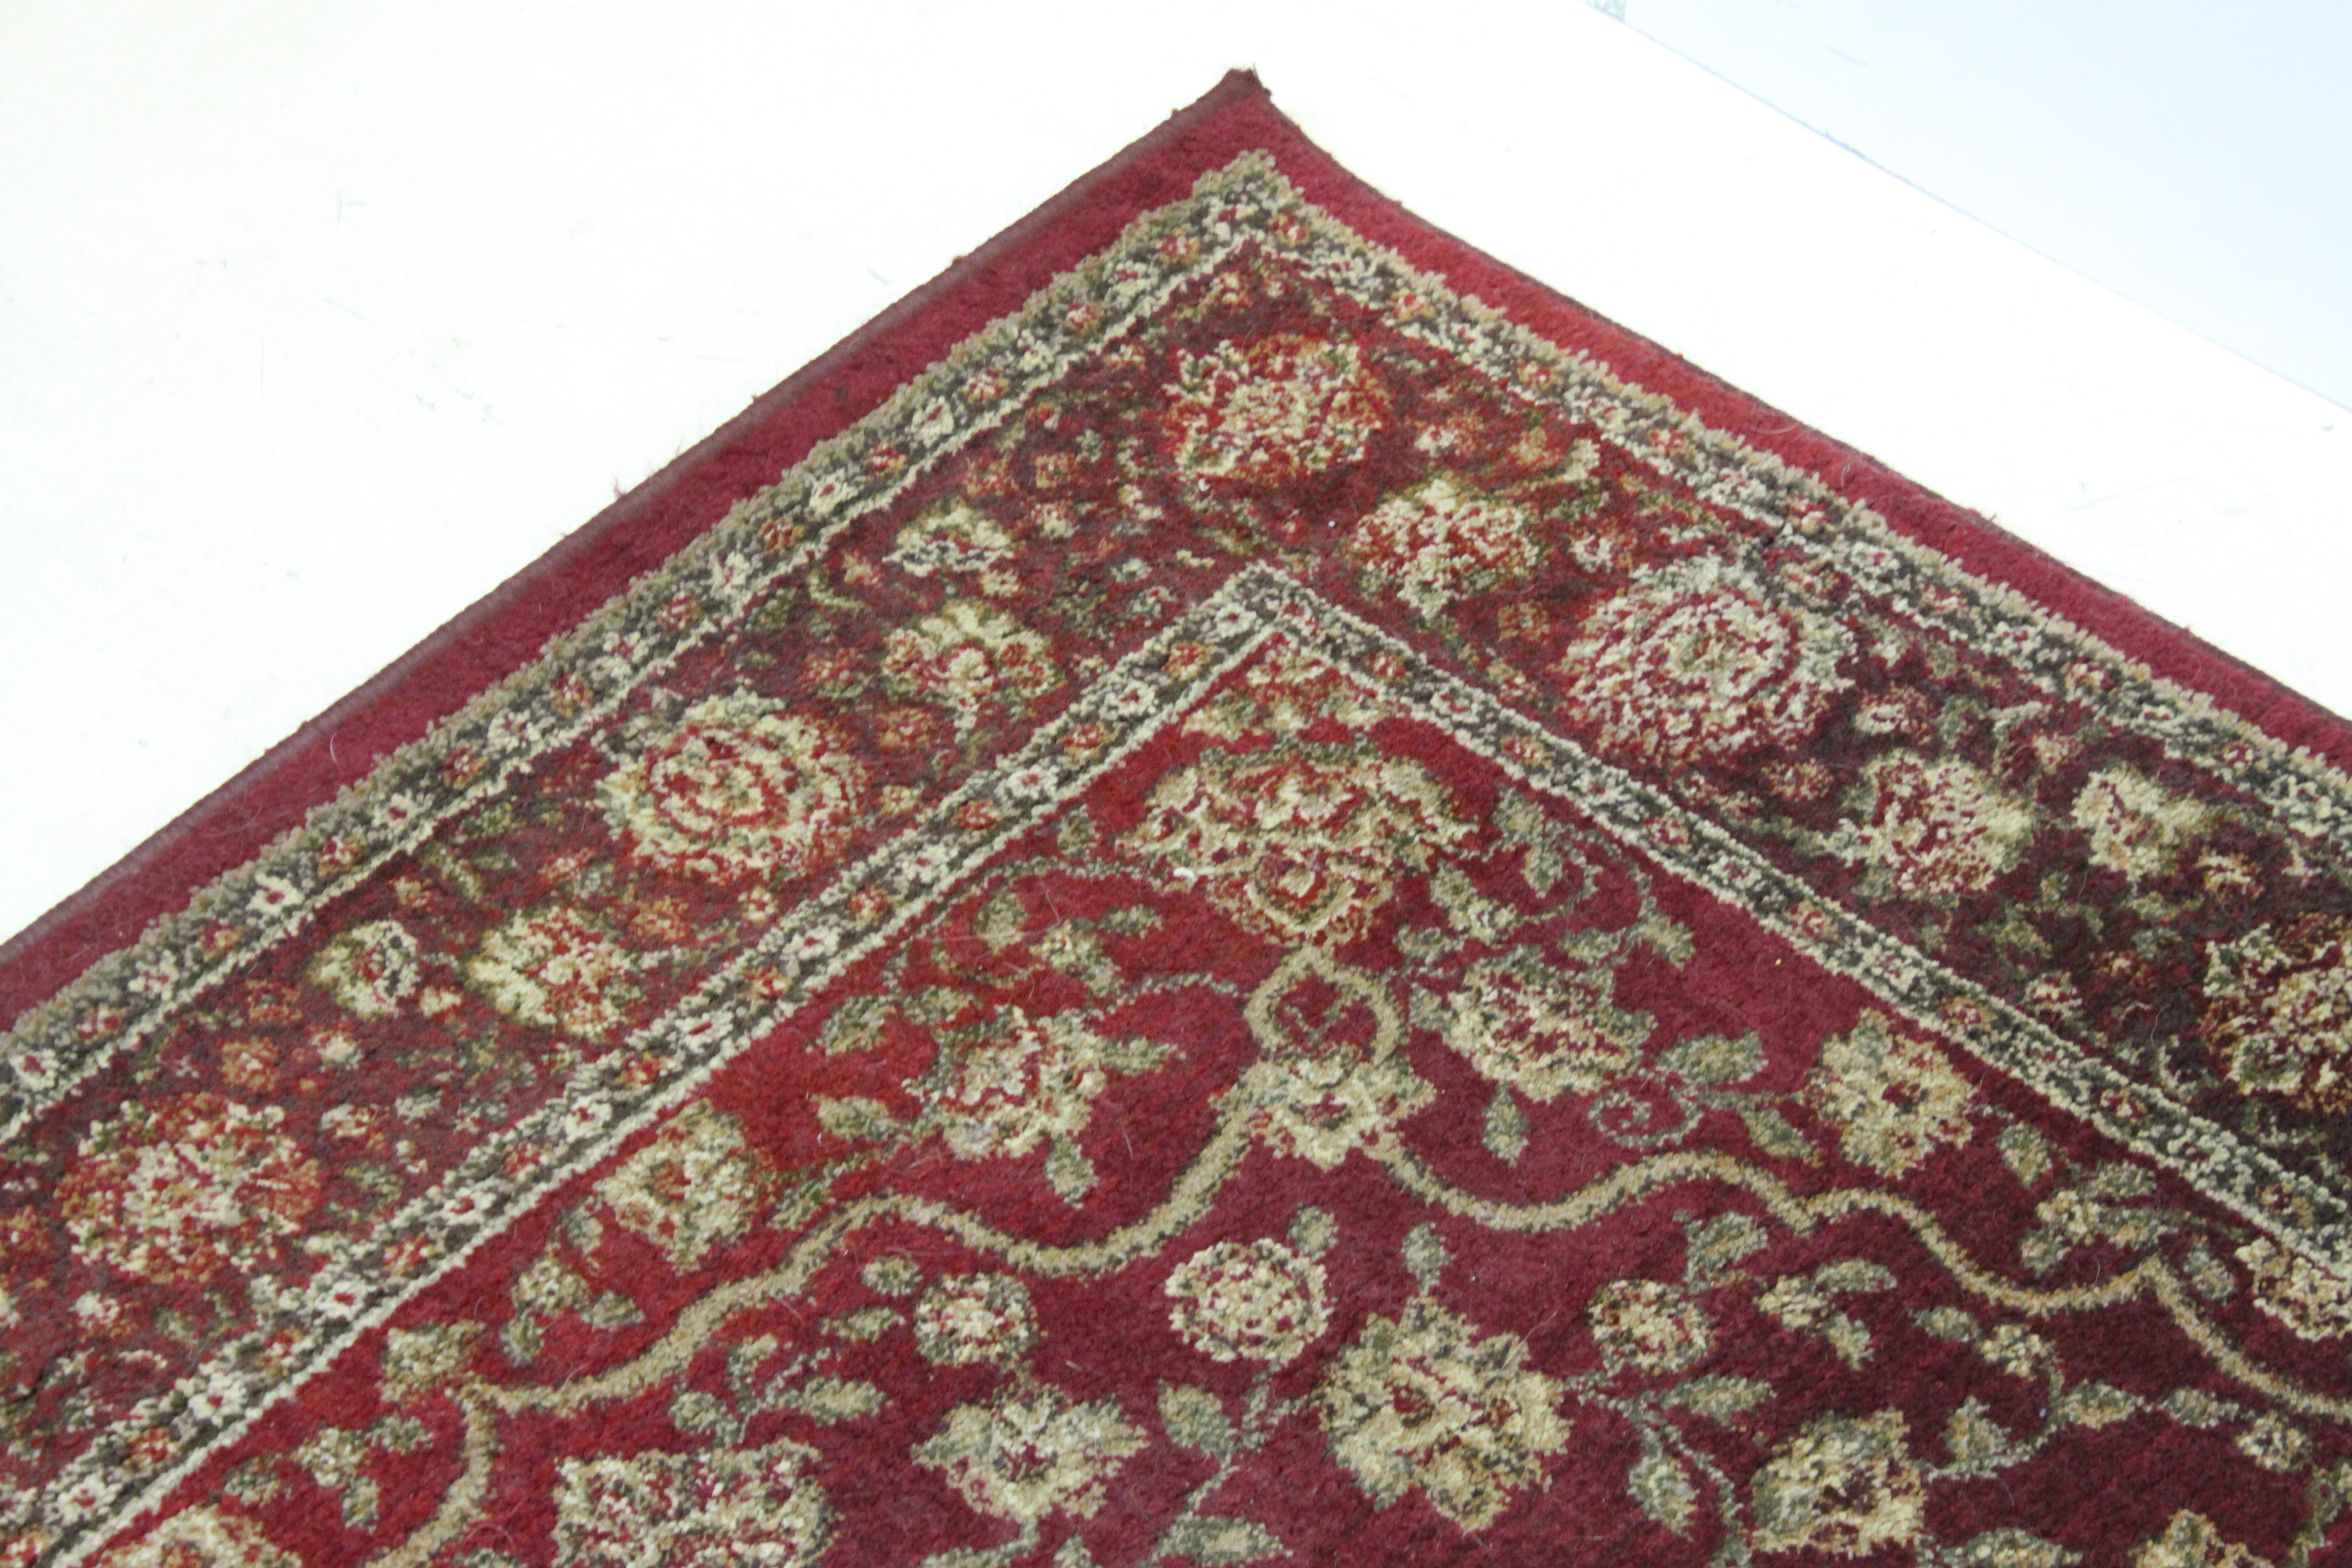 Modern Red Ground Oriental Style Rug, 170cms x 120cms - Image 2 of 6